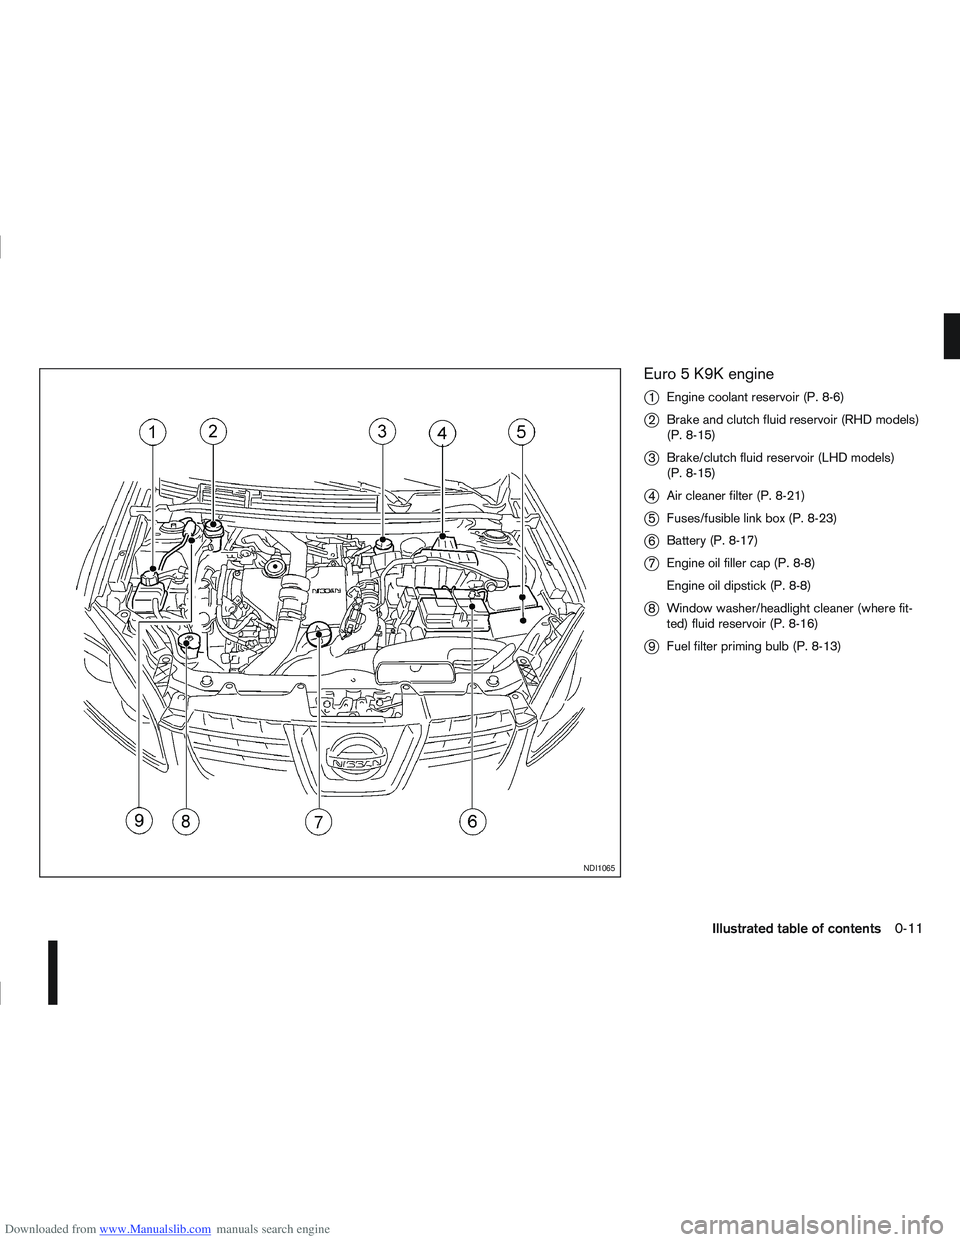 NISSAN QASHQAI 2008  Owners Manual Downloaded from www.Manualslib.com manuals search engine Euro 5 K9K engine
j
1Engine coolant reservoir (P. 8-6)
j2Brake and clutch fluid reservoir (RHD models)
(P. 8-15)
j3Brake/clutch fluid reservoir